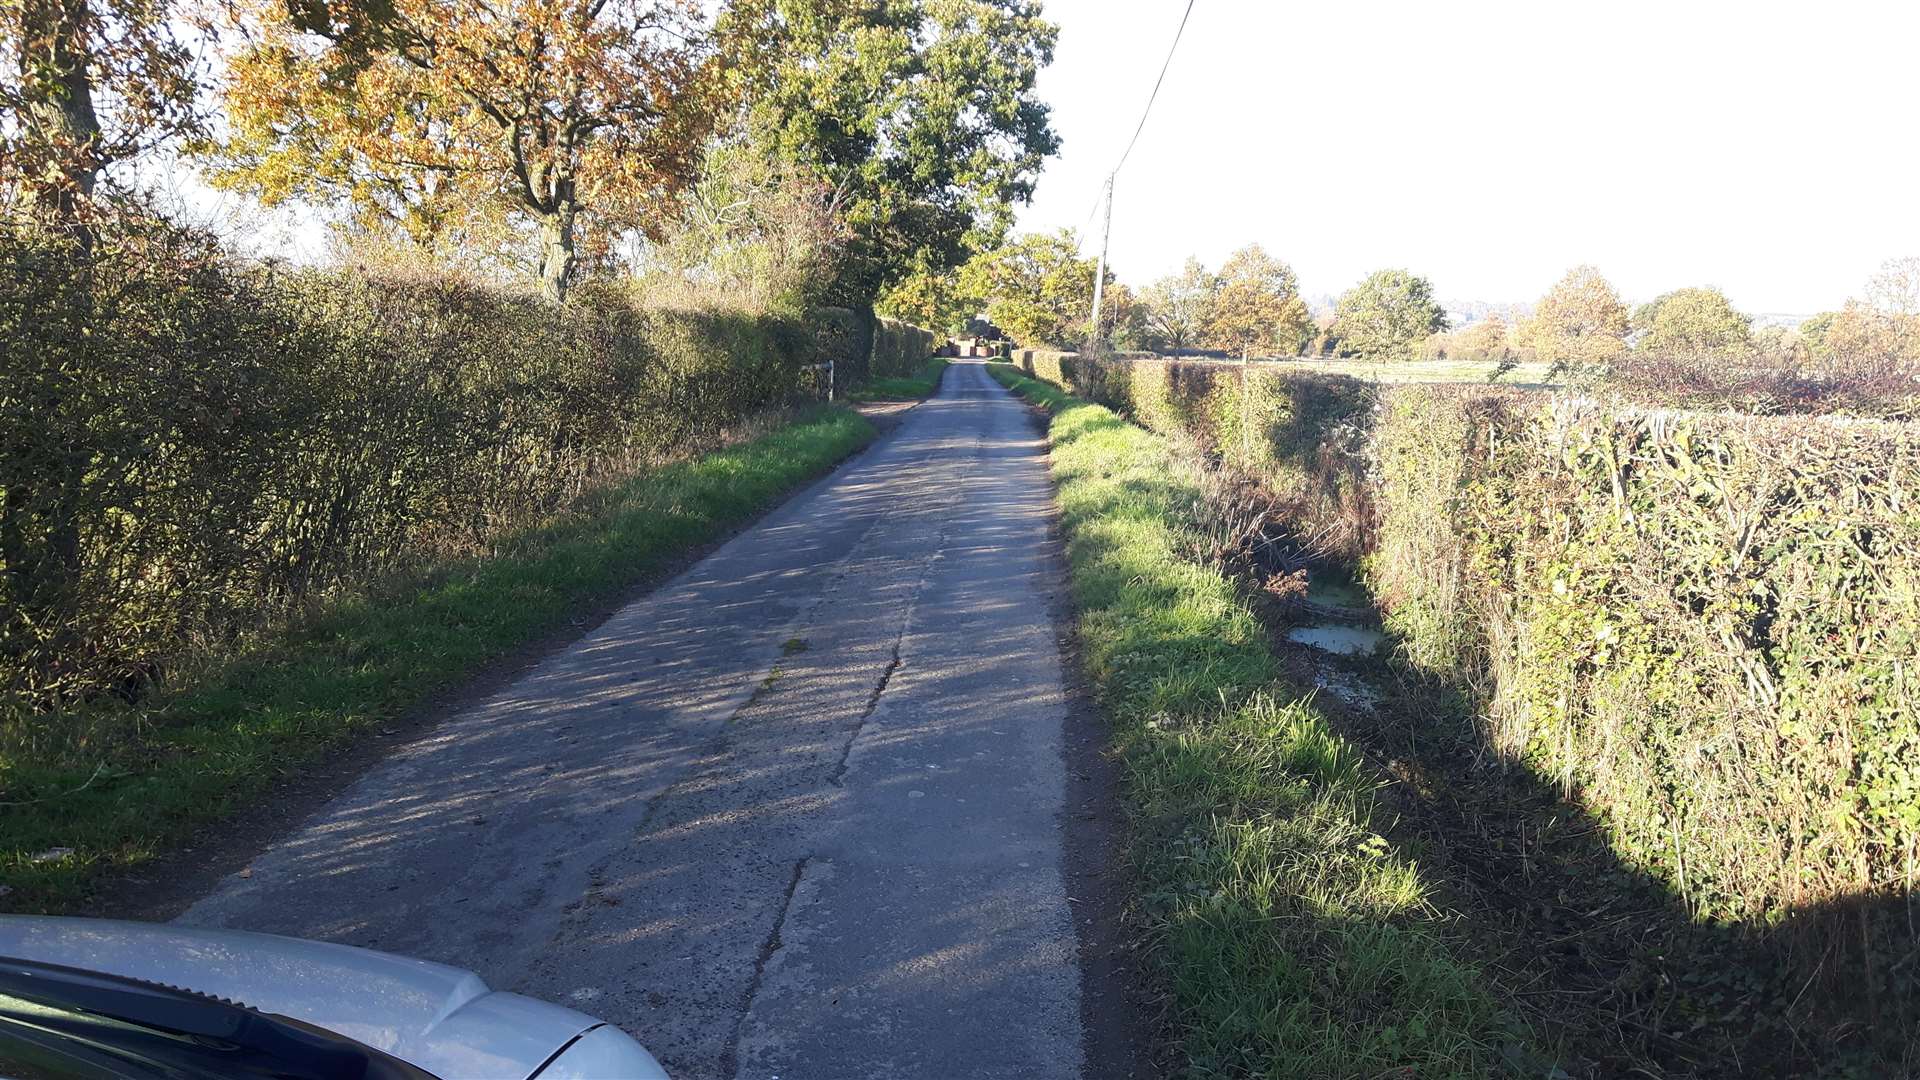 Stilebridge Lane is a single track road with a bordering ditch